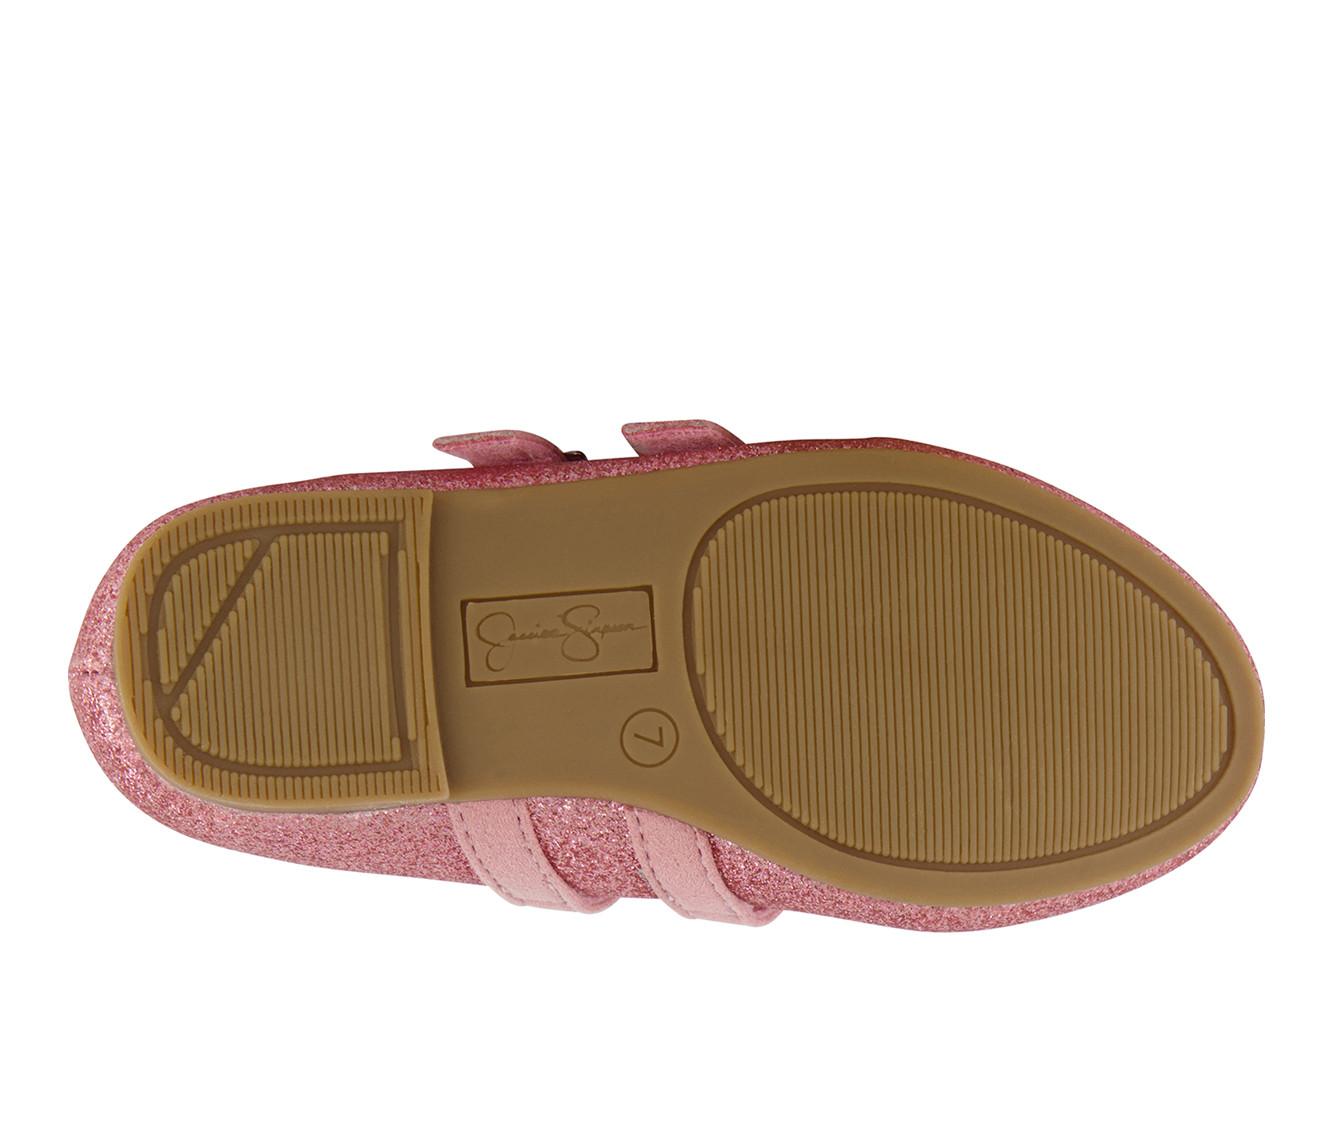 Girls' Jessica Simpson Toddler Amy Doublestrap Flats